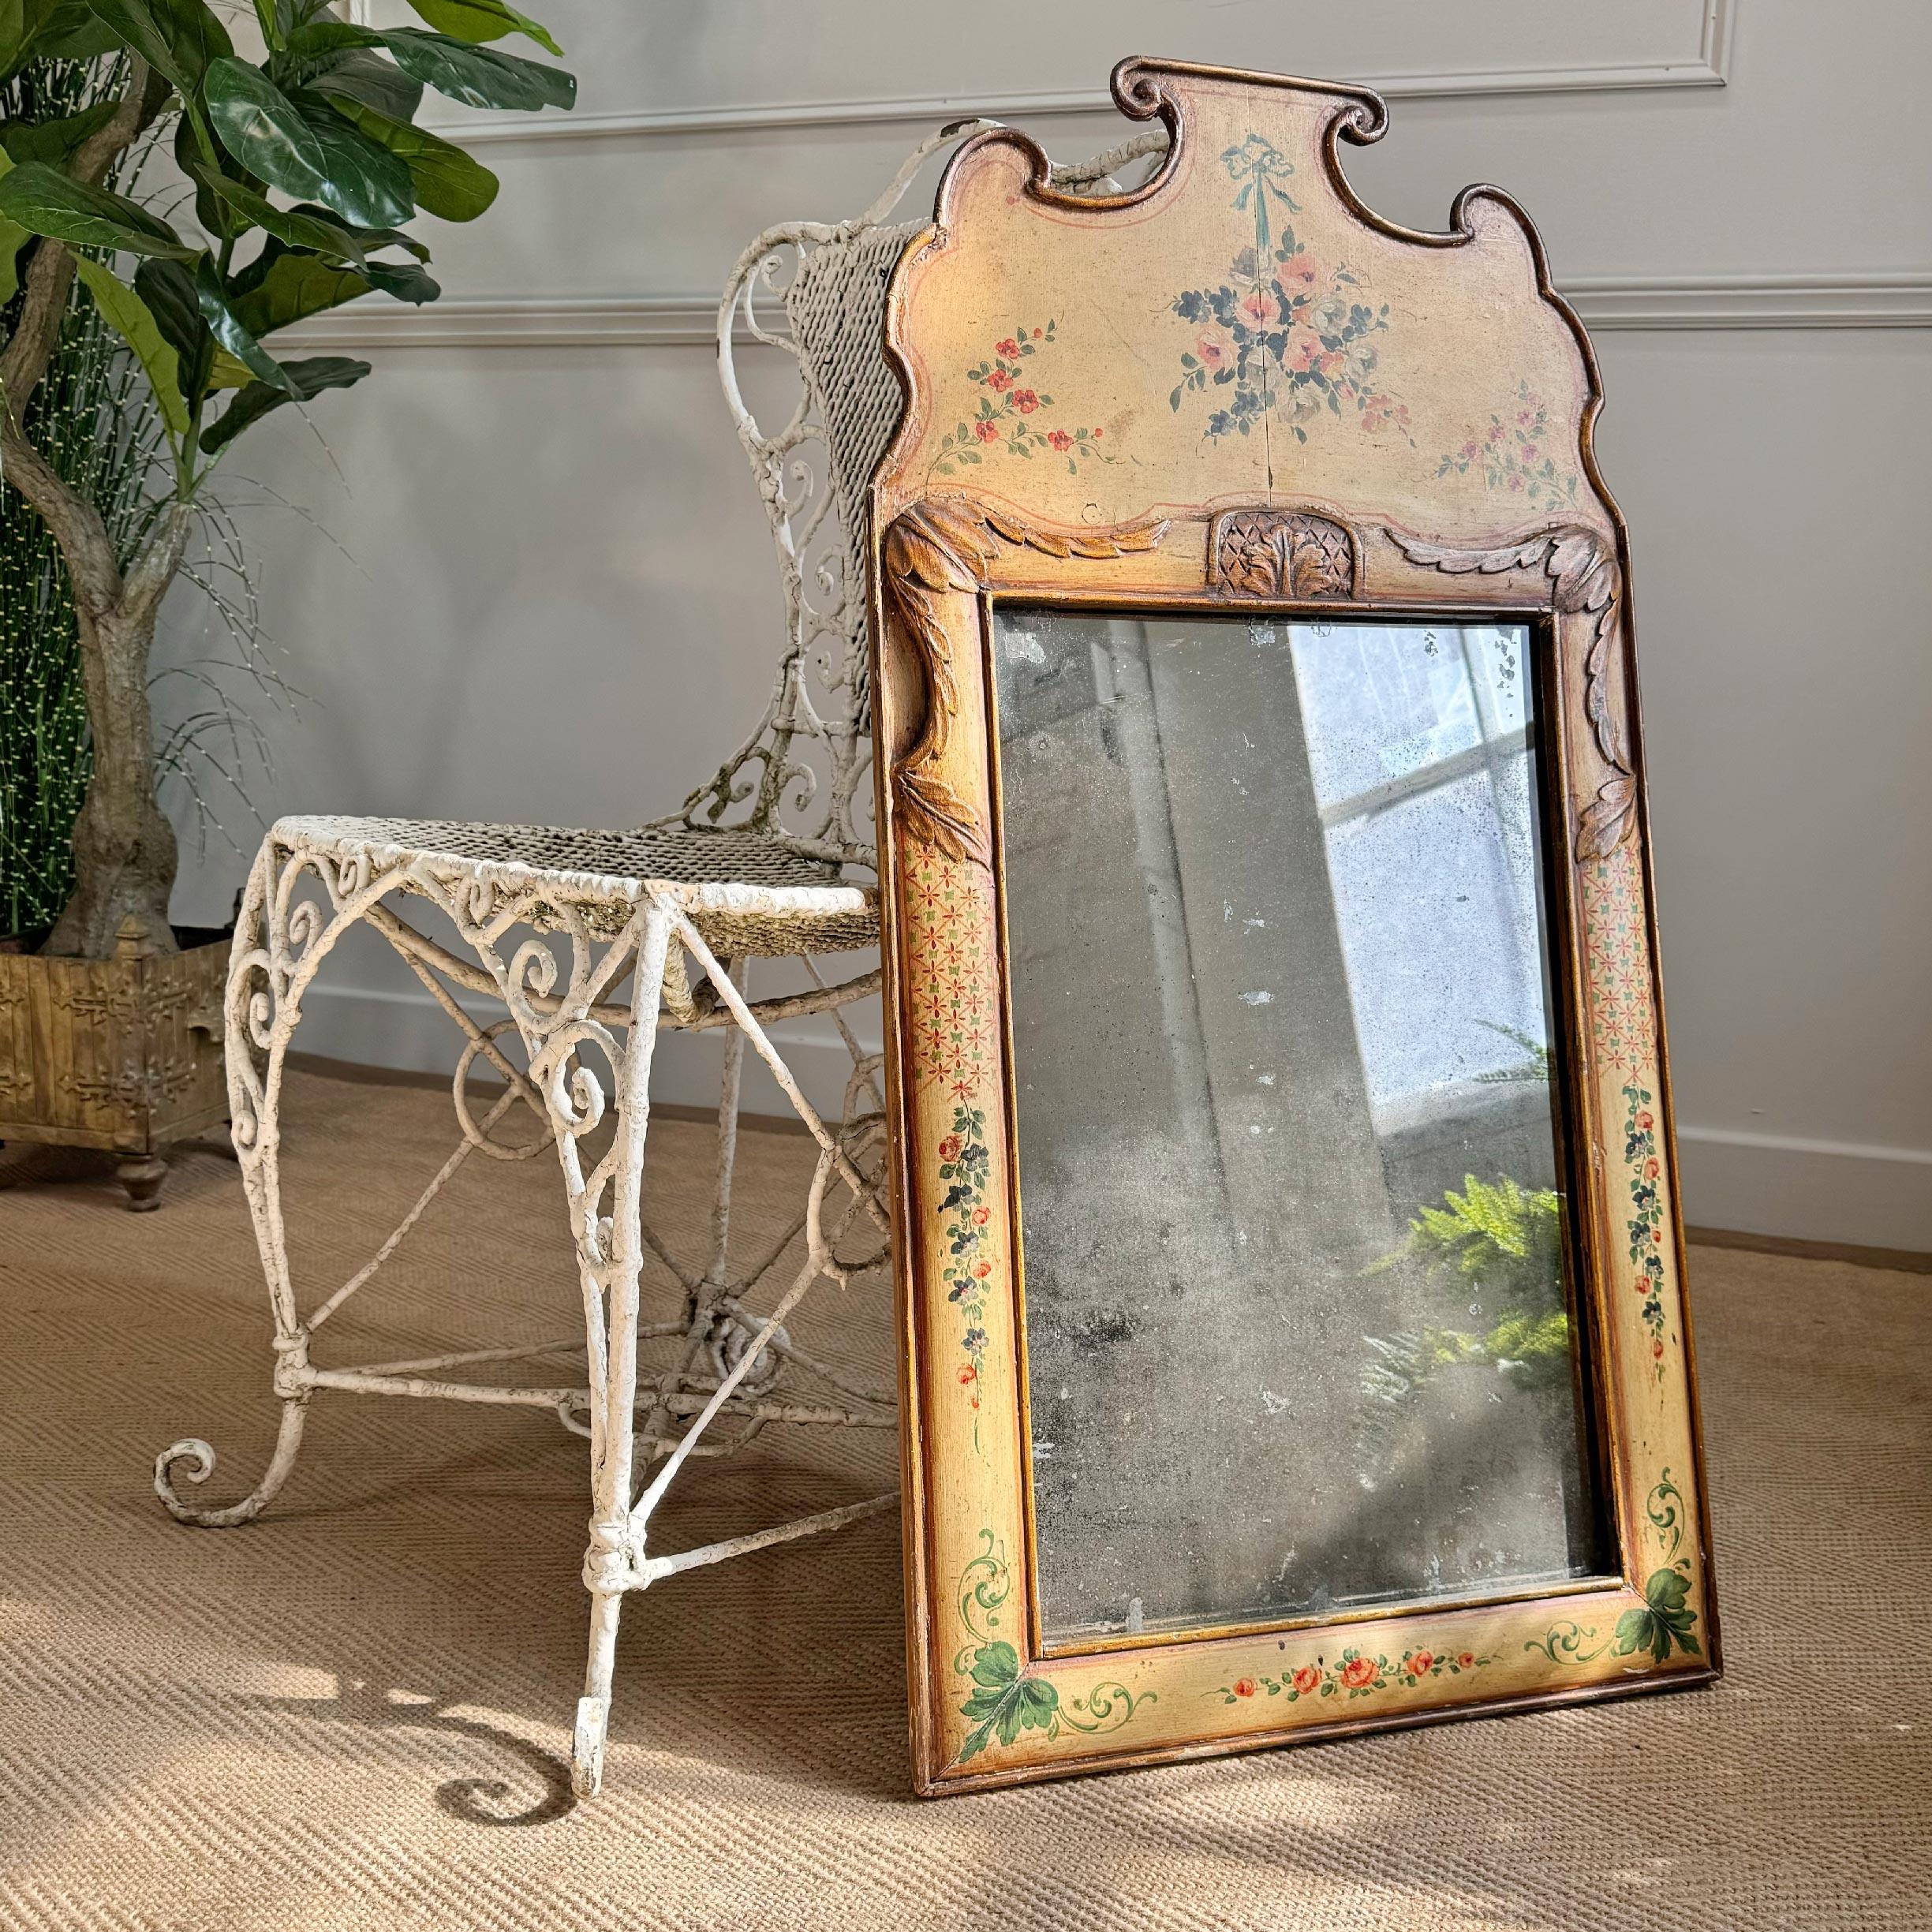 Late 18th Century 18th Century Queen Anne Style Floral Mirror For Sale